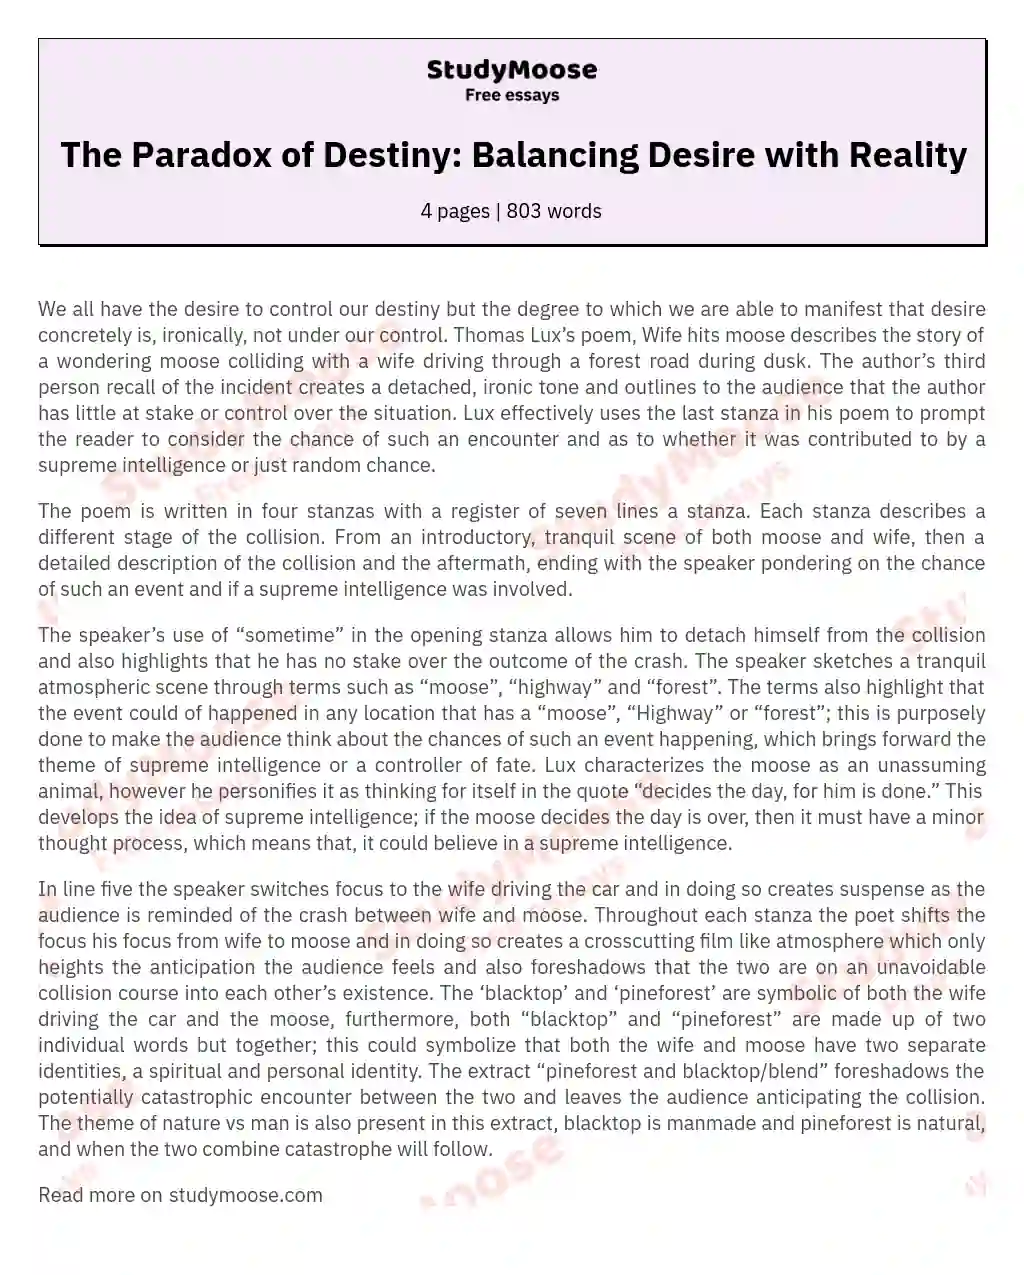 The Paradox of Destiny: Balancing Desire with Reality essay